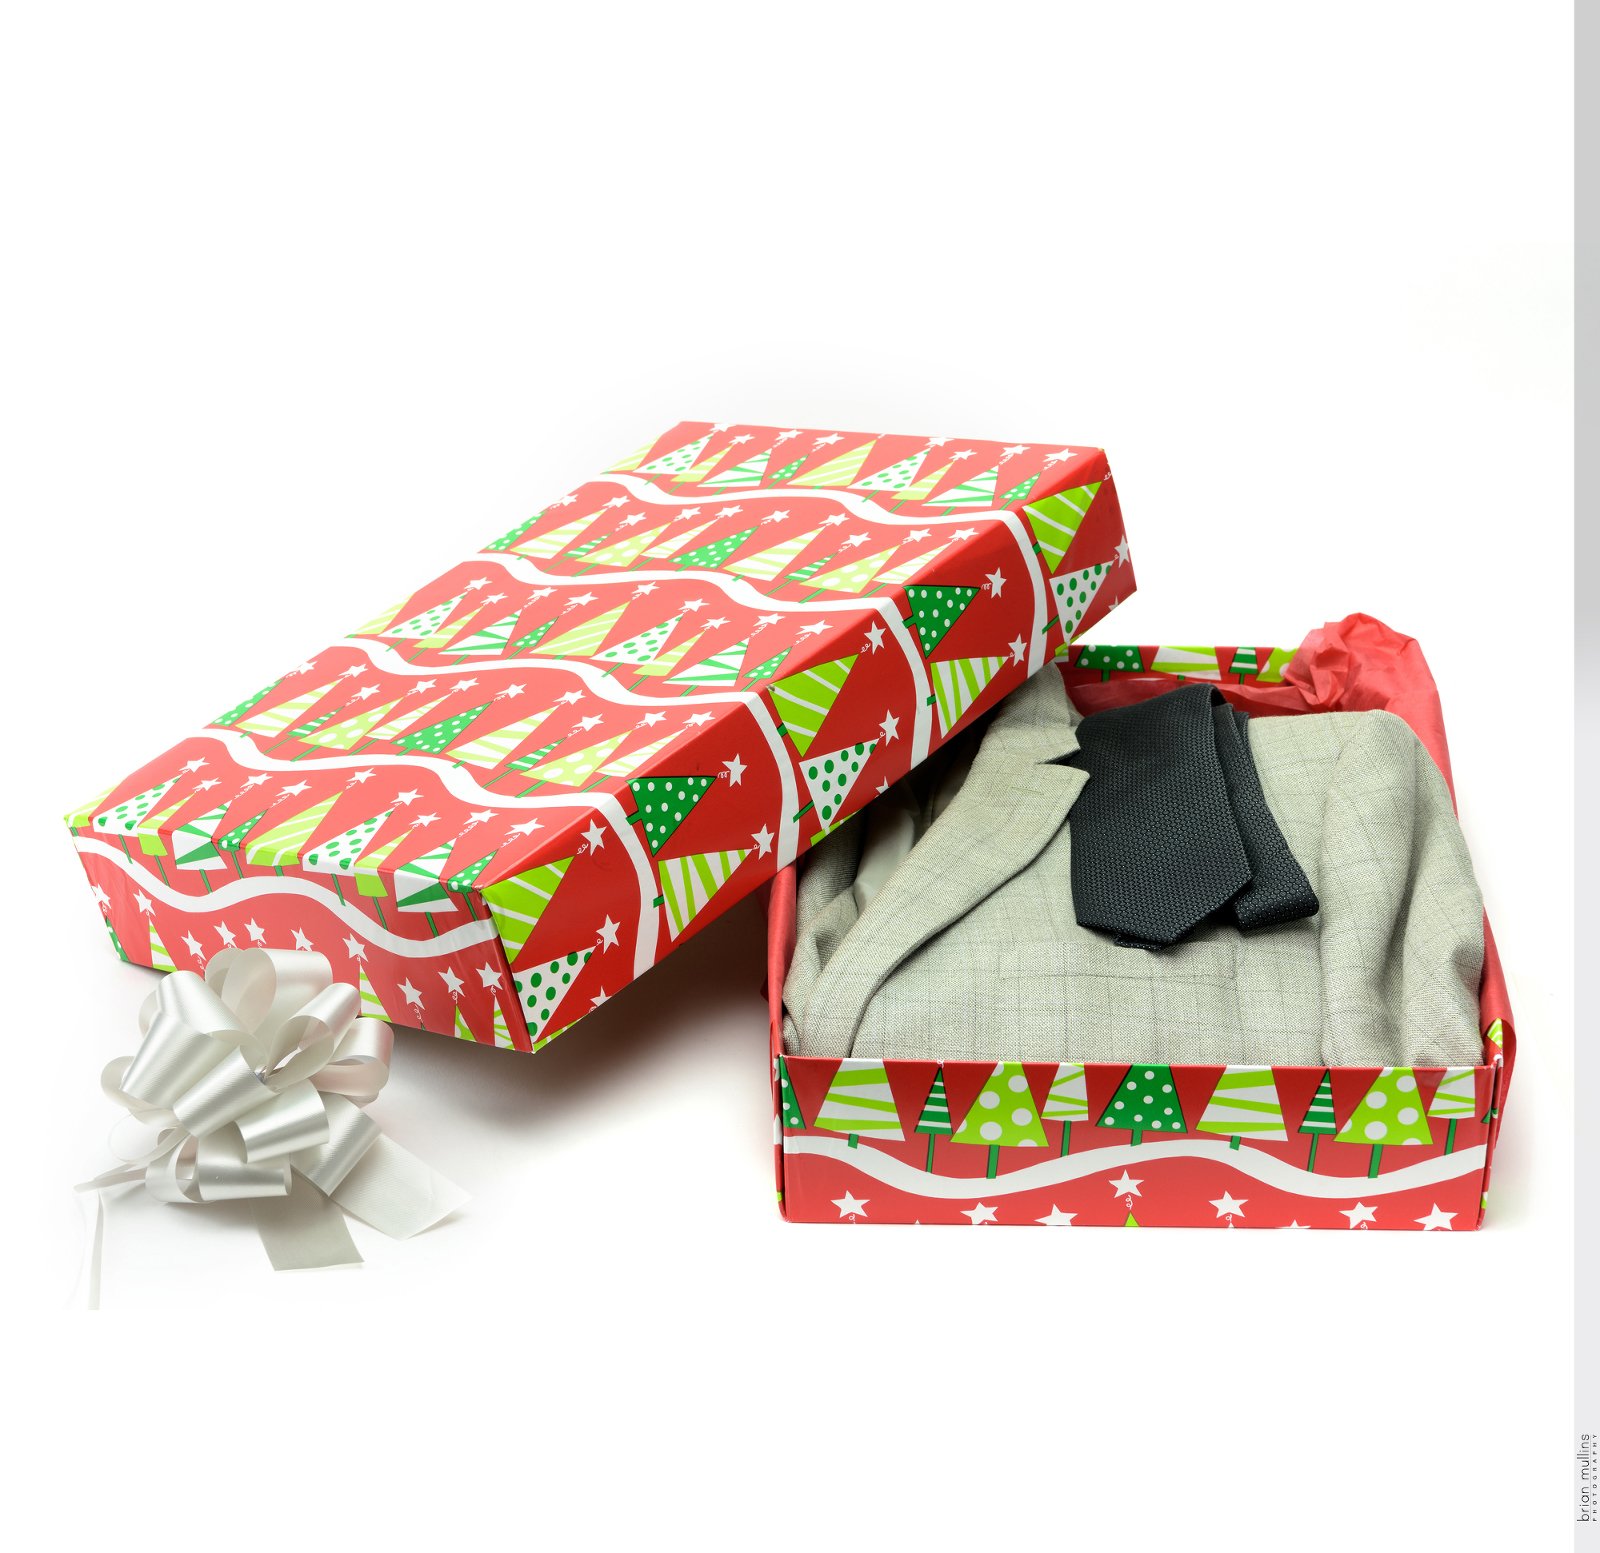 ready wrap gift box.0110%28pp w1600 h1553%29 - How product photography helps your product come alive